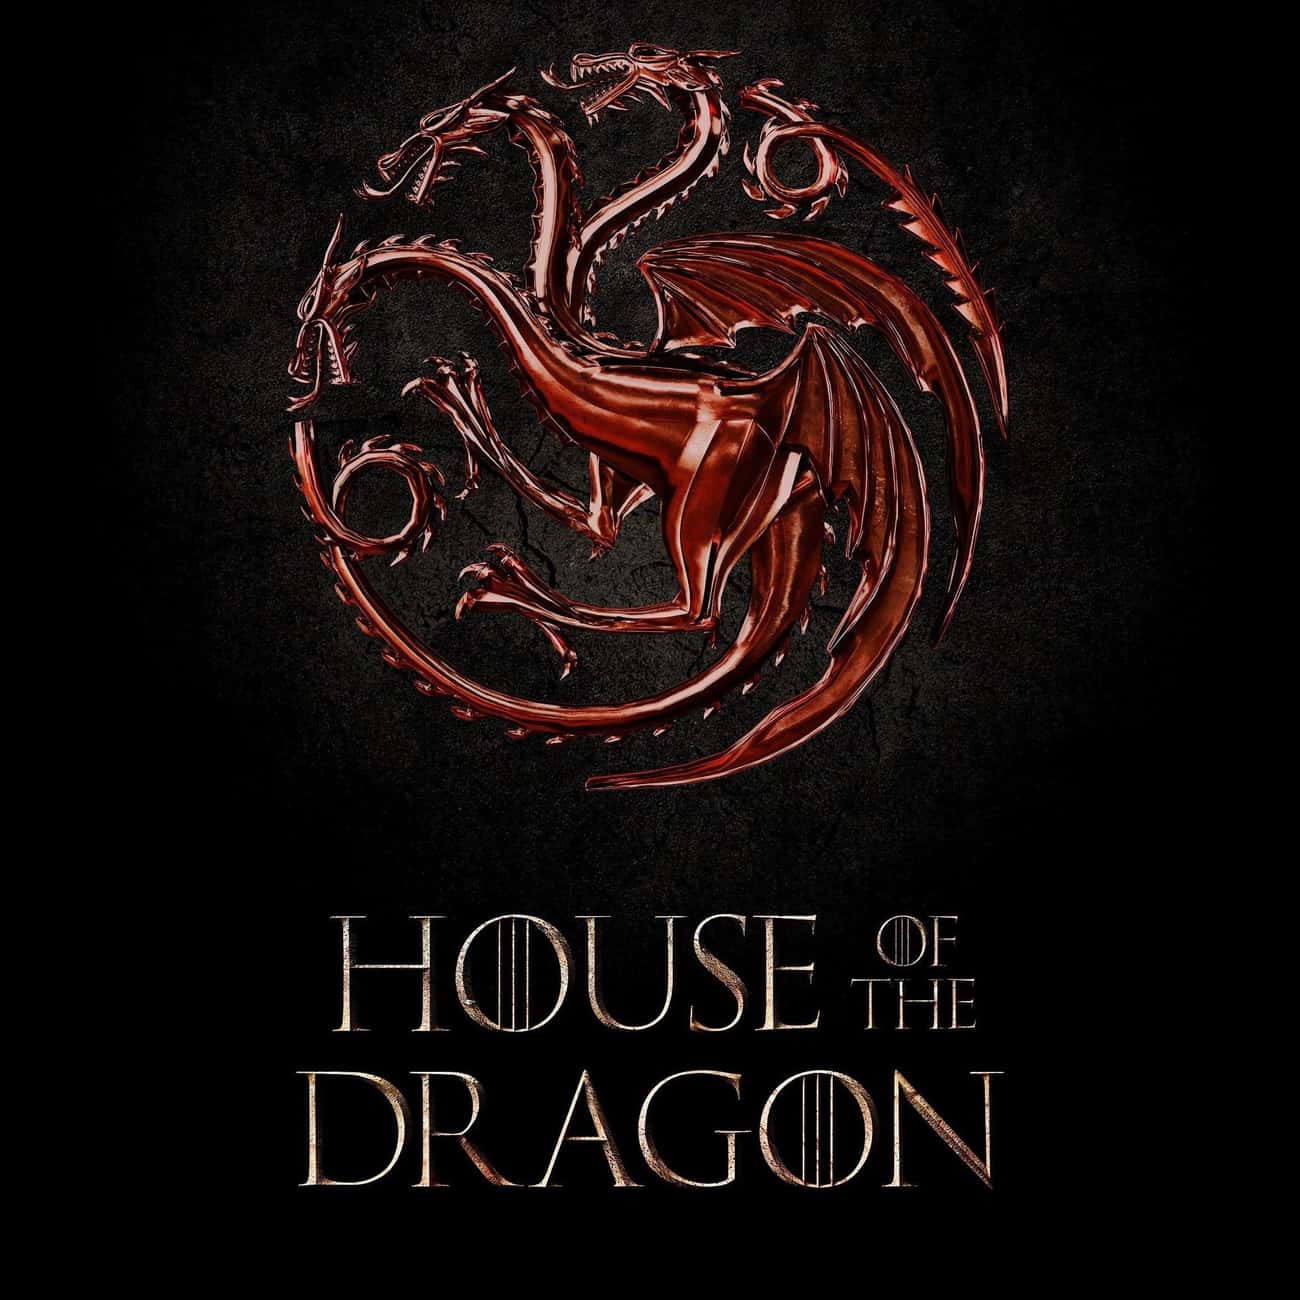 October 5, 2020 - HBO Moves Forward With 'House of the Dragon'